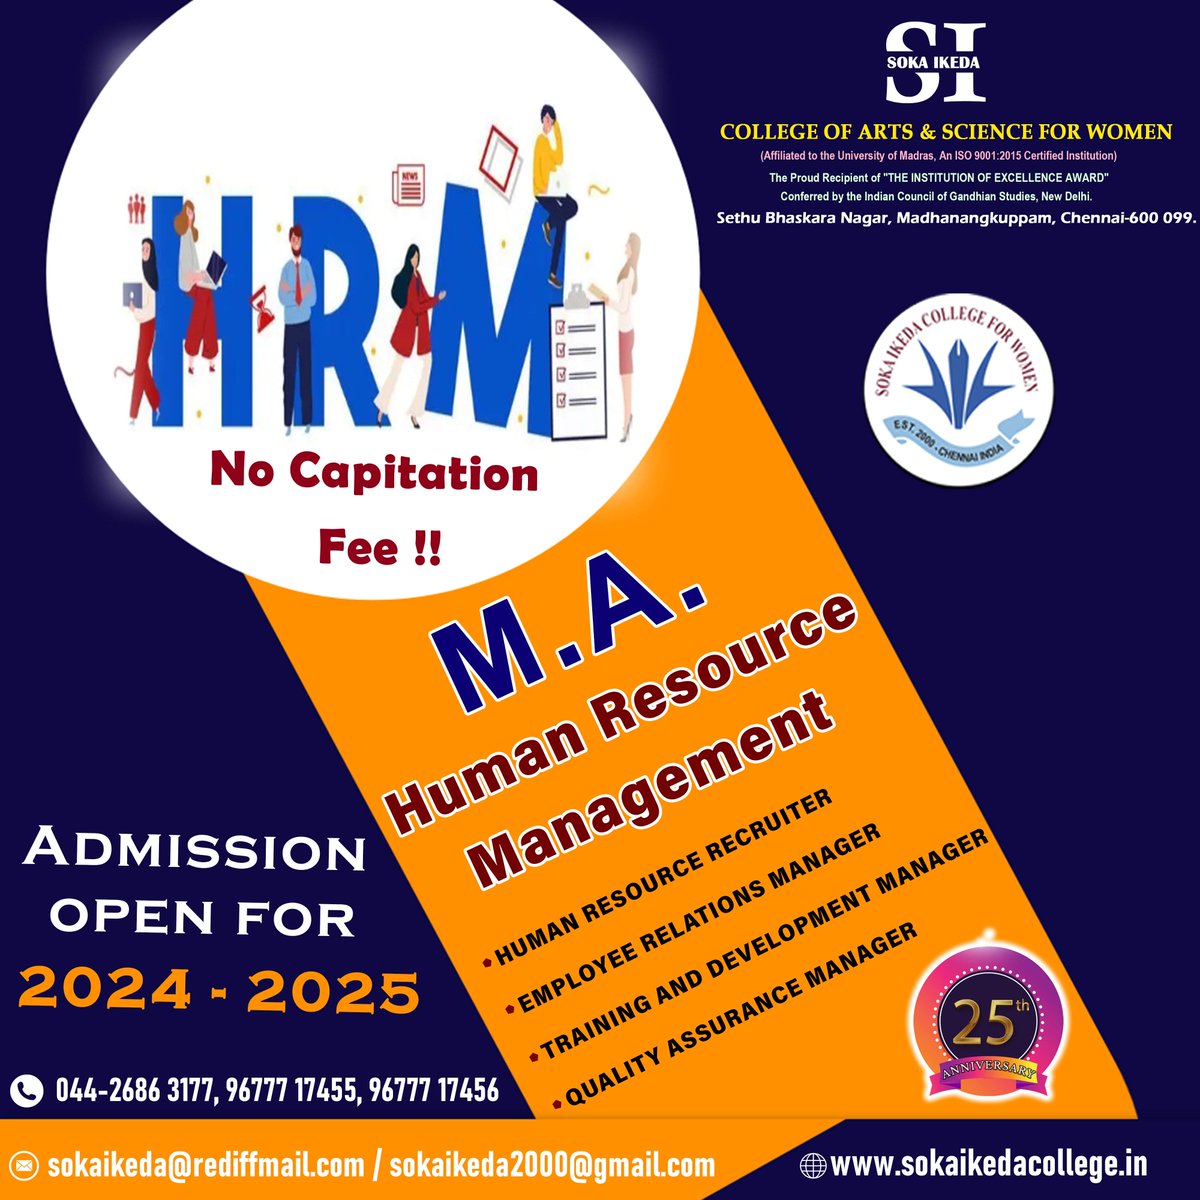 𝐀𝐝𝐦𝐢𝐬𝐬𝐢𝐨𝐧 𝐎𝐩𝐞𝐧 𝟐𝟎𝟐𝟒-𝟐𝟎𝟐𝟓
M.A- Human Resource Management
𝐒𝐨𝐤𝐚 𝐈𝐤𝐞𝐝𝐚 𝐂𝐨𝐥𝐥𝐞𝐠𝐞 𝐨𝐟 𝐀𝐫𝐭𝐬 𝐚𝐧𝐝 𝐒𝐜𝐢𝐞𝐧𝐜𝐞 𝐟𝐨𝐫 𝐖𝐨𝐦𝐞𝐧
Online Admission: sokaikedacollege.in/#/online-submi…
#HRM #HumanResourceManagement #MA #scopeofhrm  #sokaIkeda